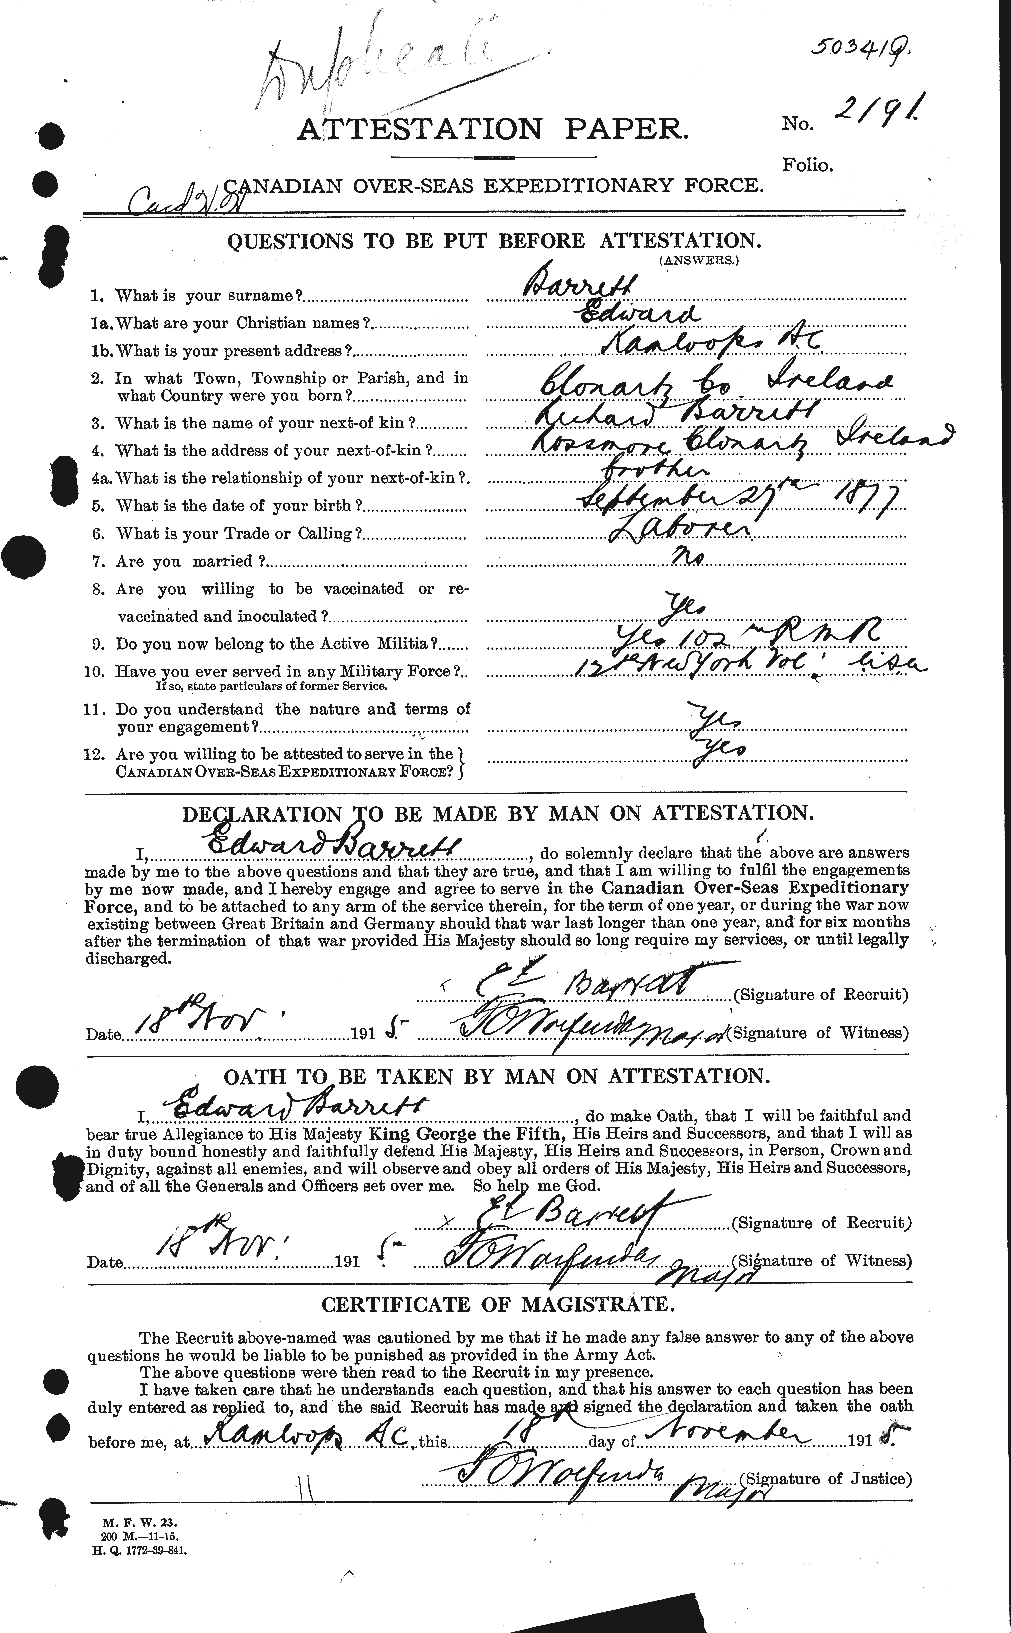 Personnel Records of the First World War - CEF 220362a